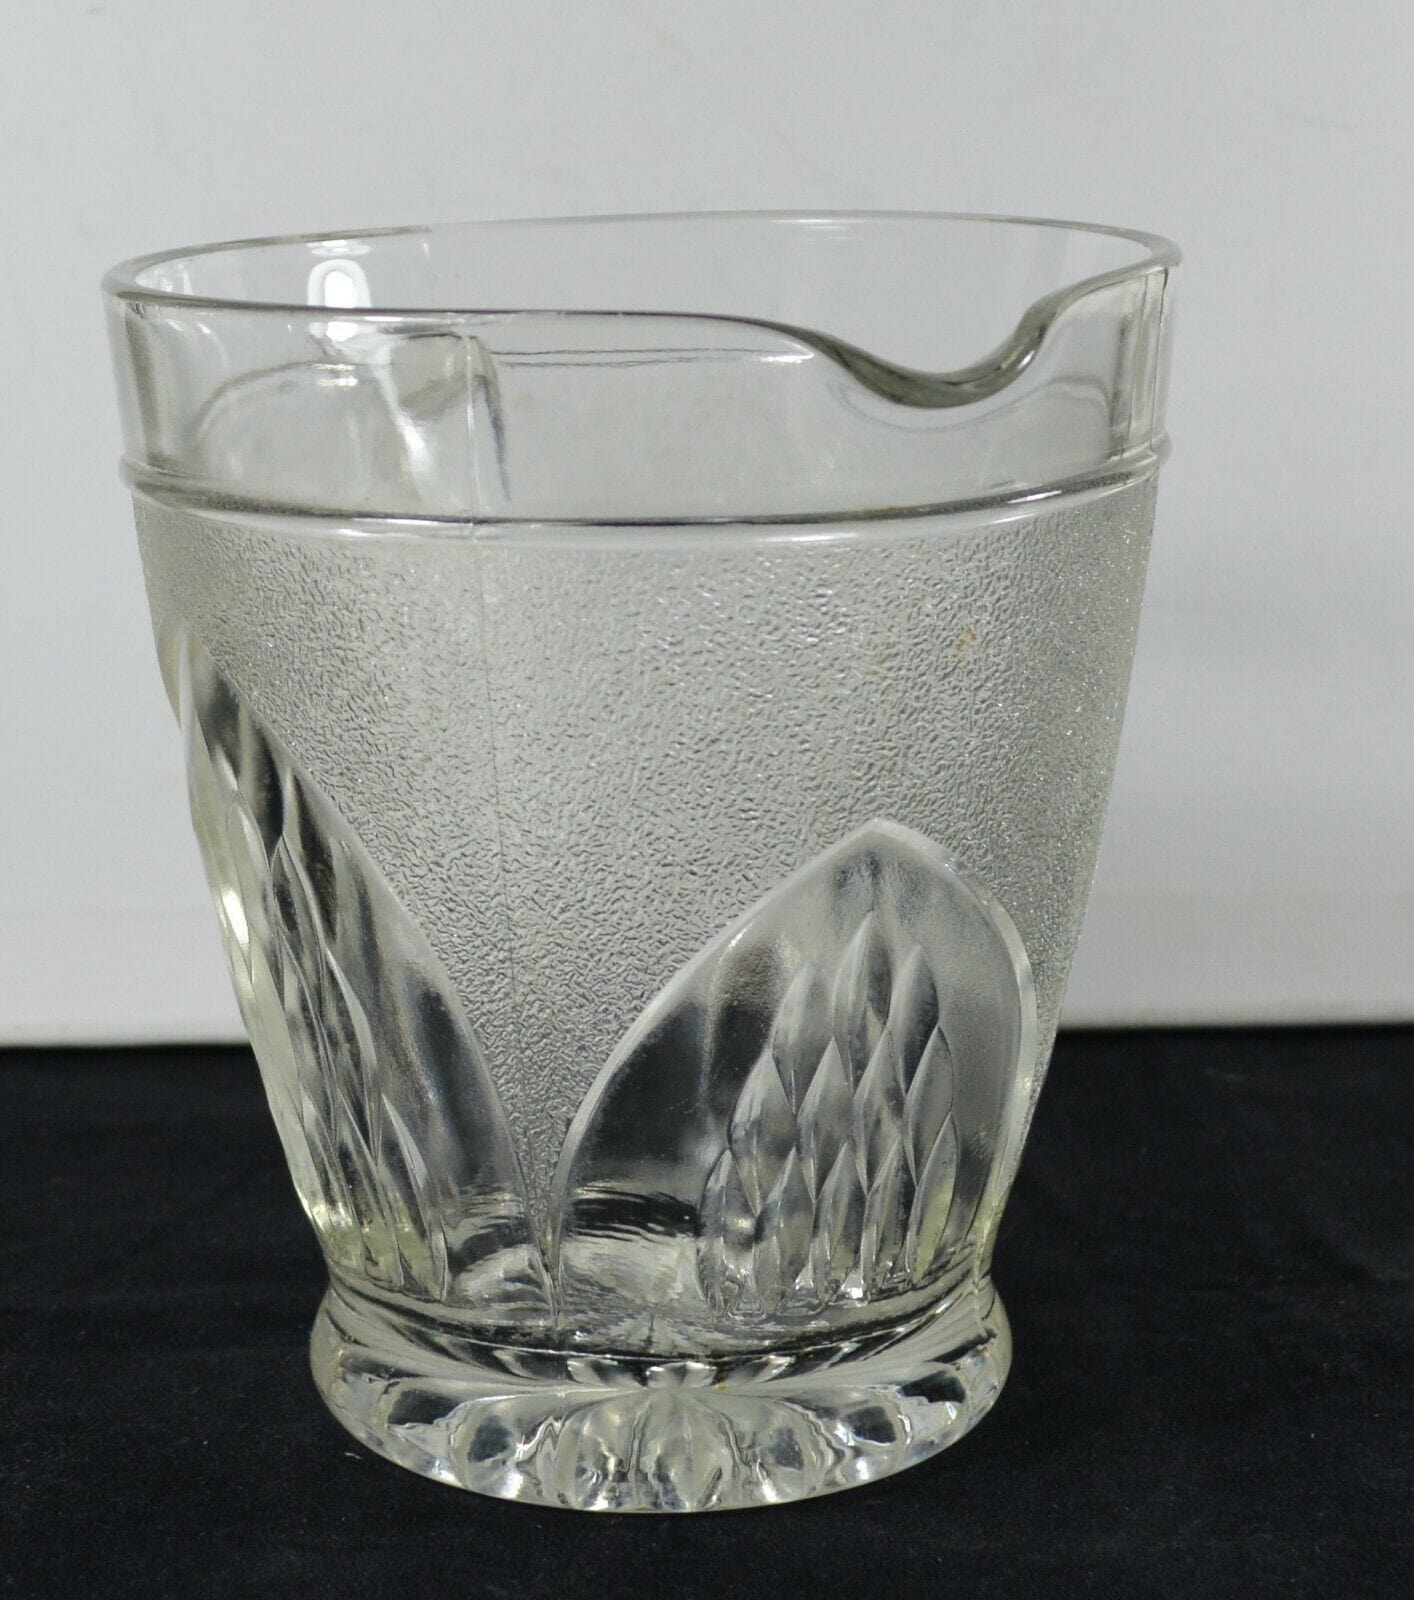 TABLEWARE VINTAGE GLASS JUG(PREVIOUSLY OWNED)GOOD CONDITION - TMD167207